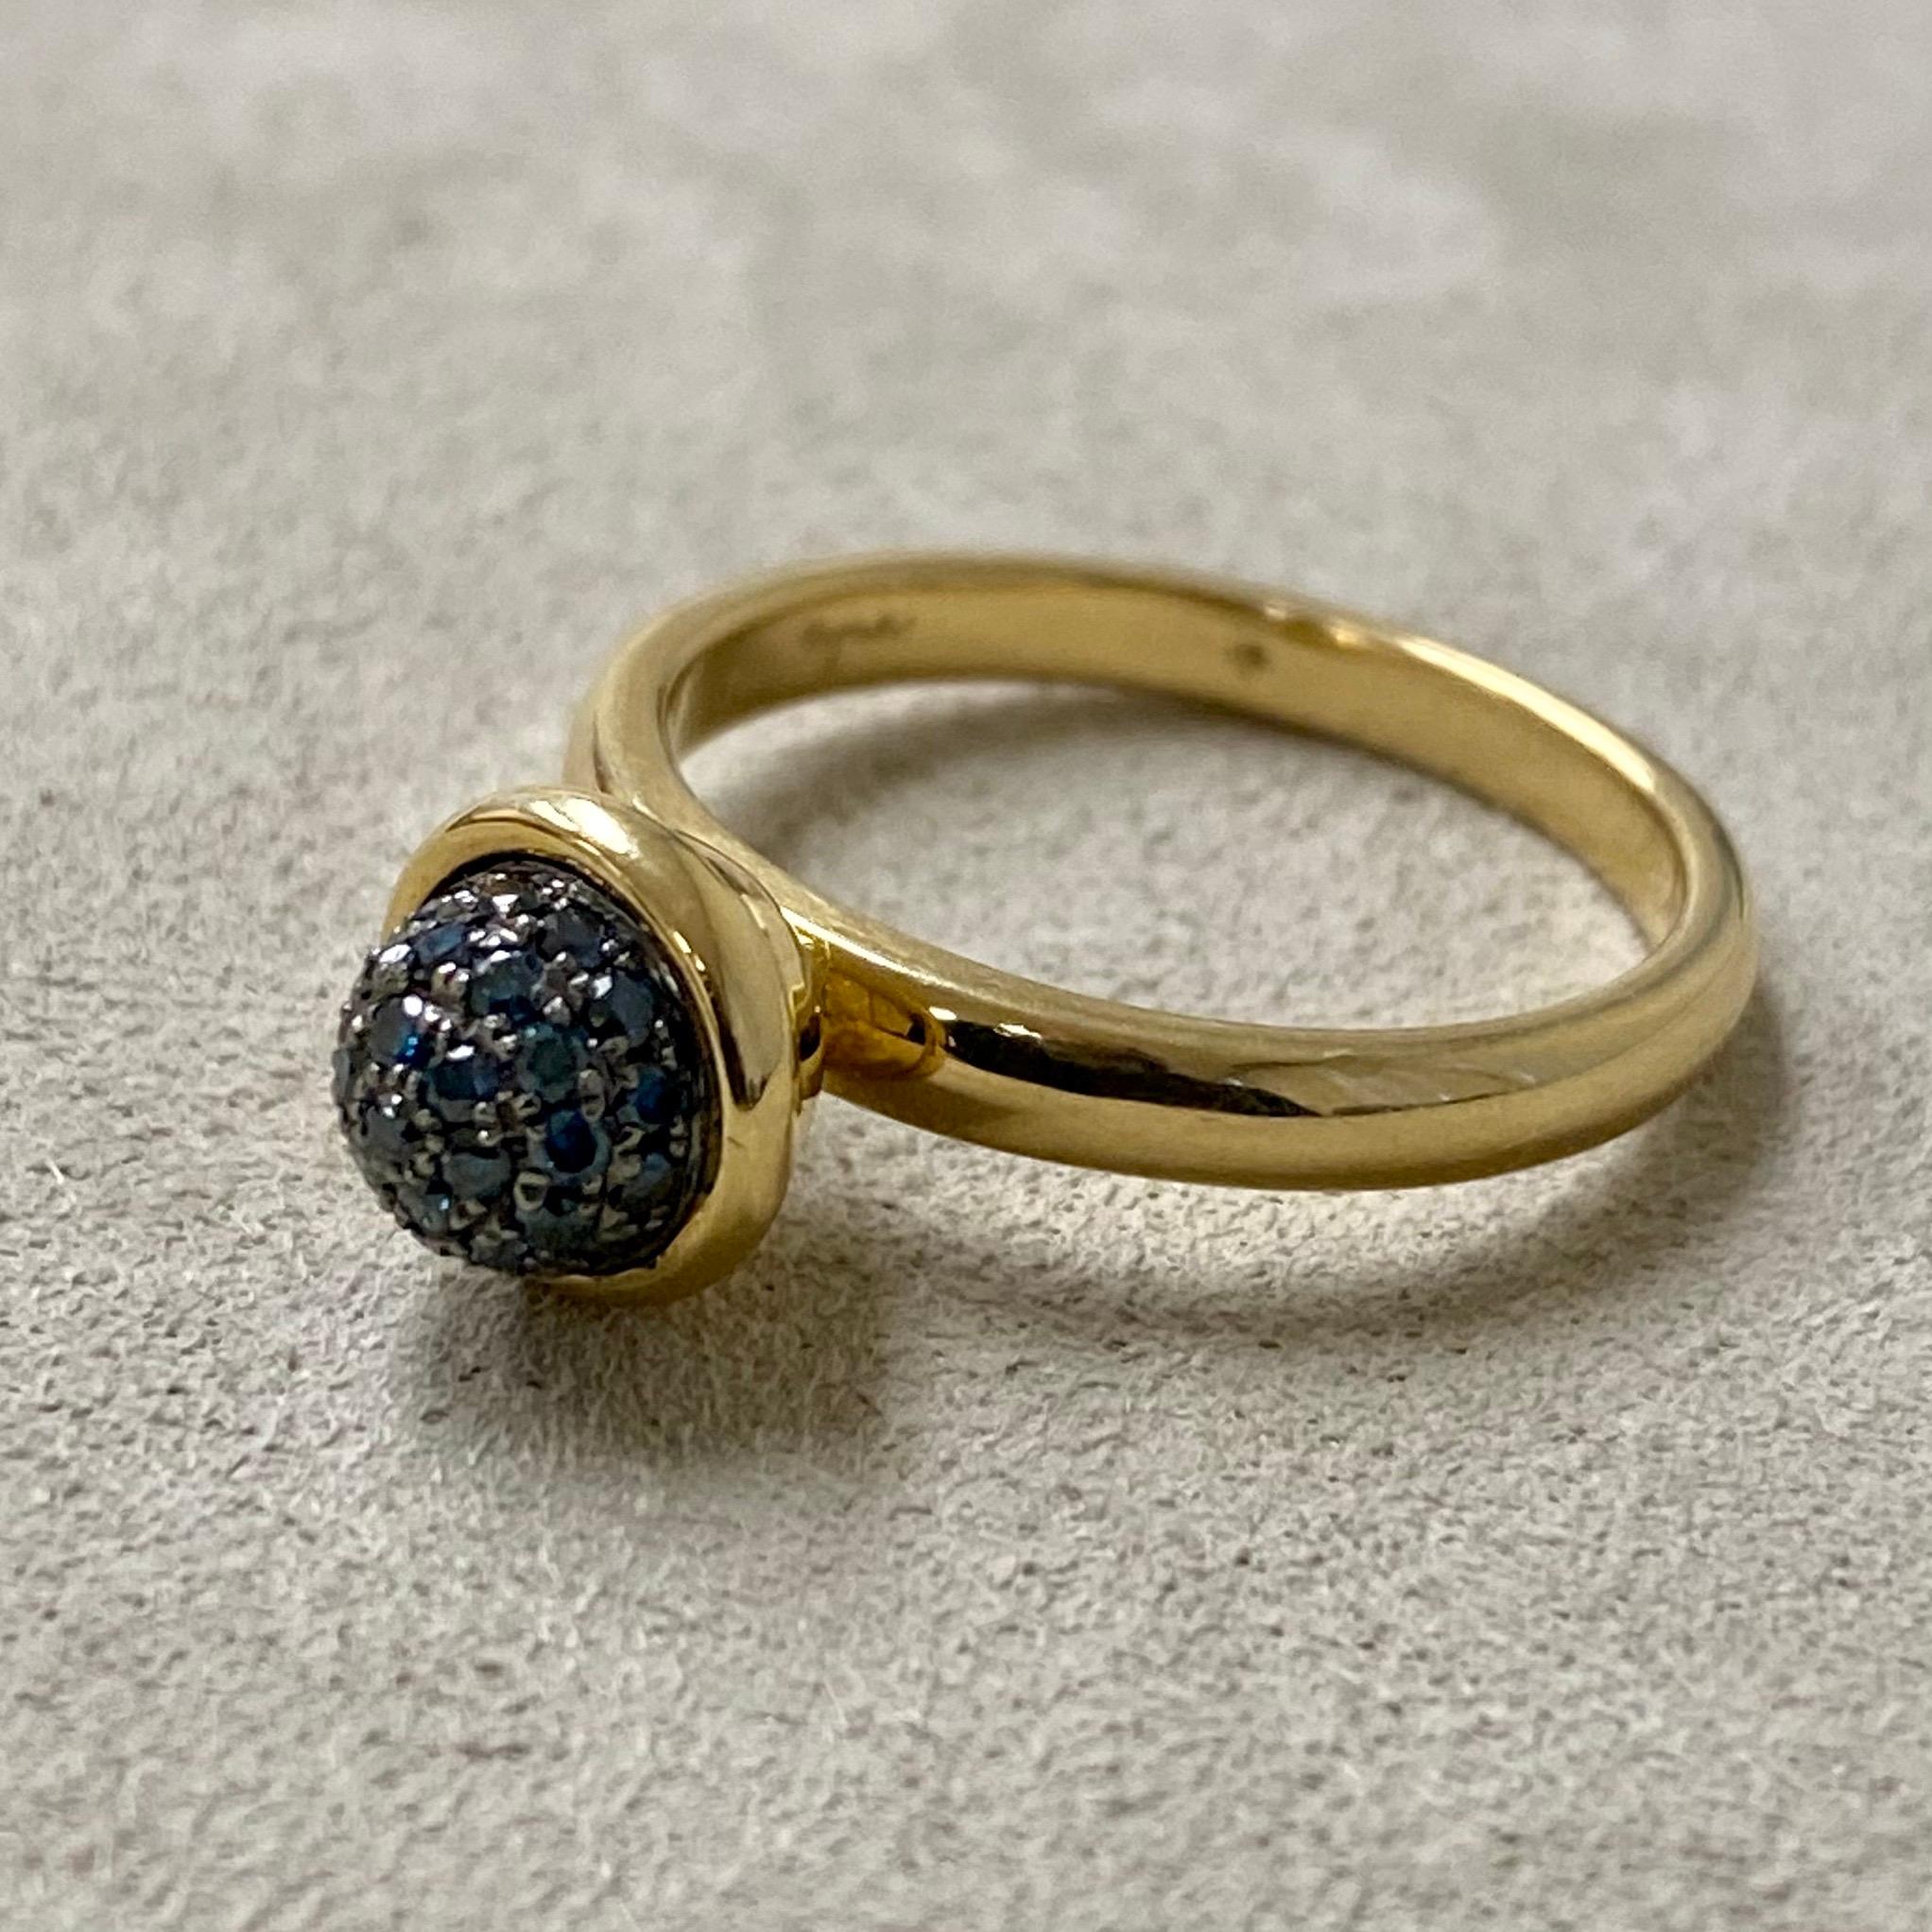 Created in 18 karat yellow gold
Blue diamonds 0.30 carat approx.
Blue diamond pave ring 8 mm diameter approx.
Ring size US 6.5, can be sized upon request.

Crafted from luxuriant 18 karat yellow gold, this exquisite ring is encrusted with an array